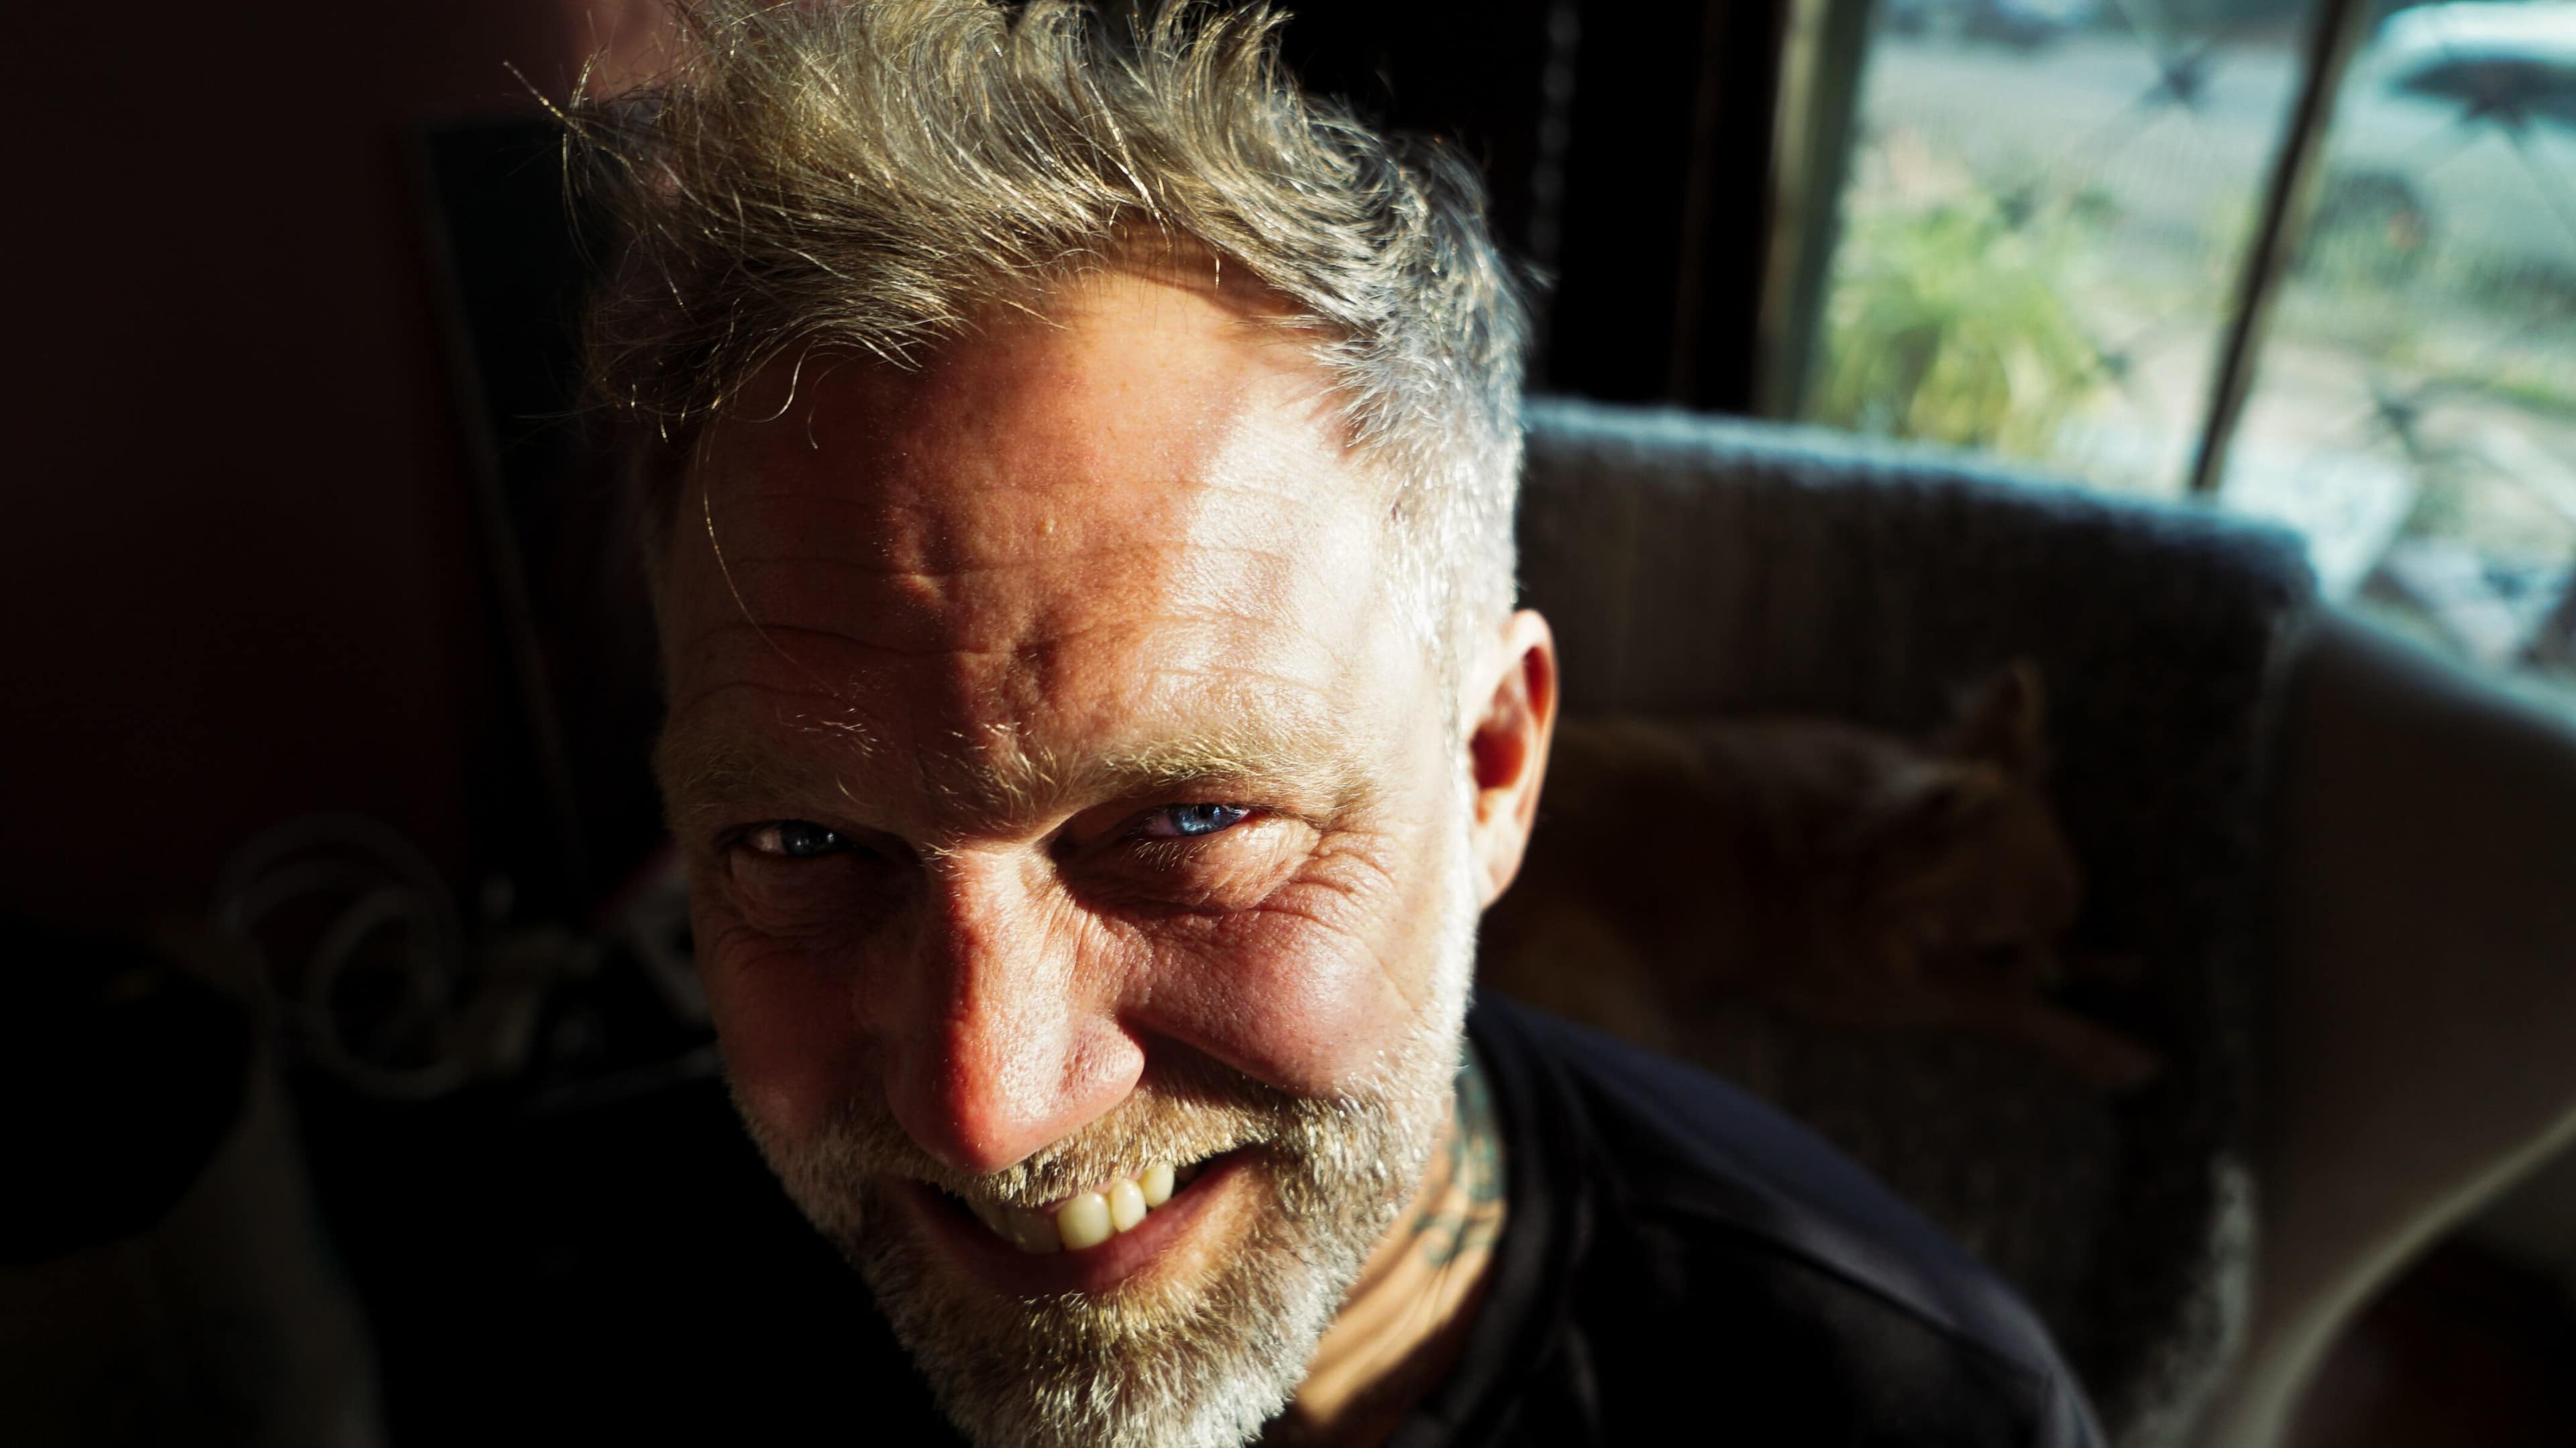 Anders Osborne Releases Video for Single “Traveling with Friends”